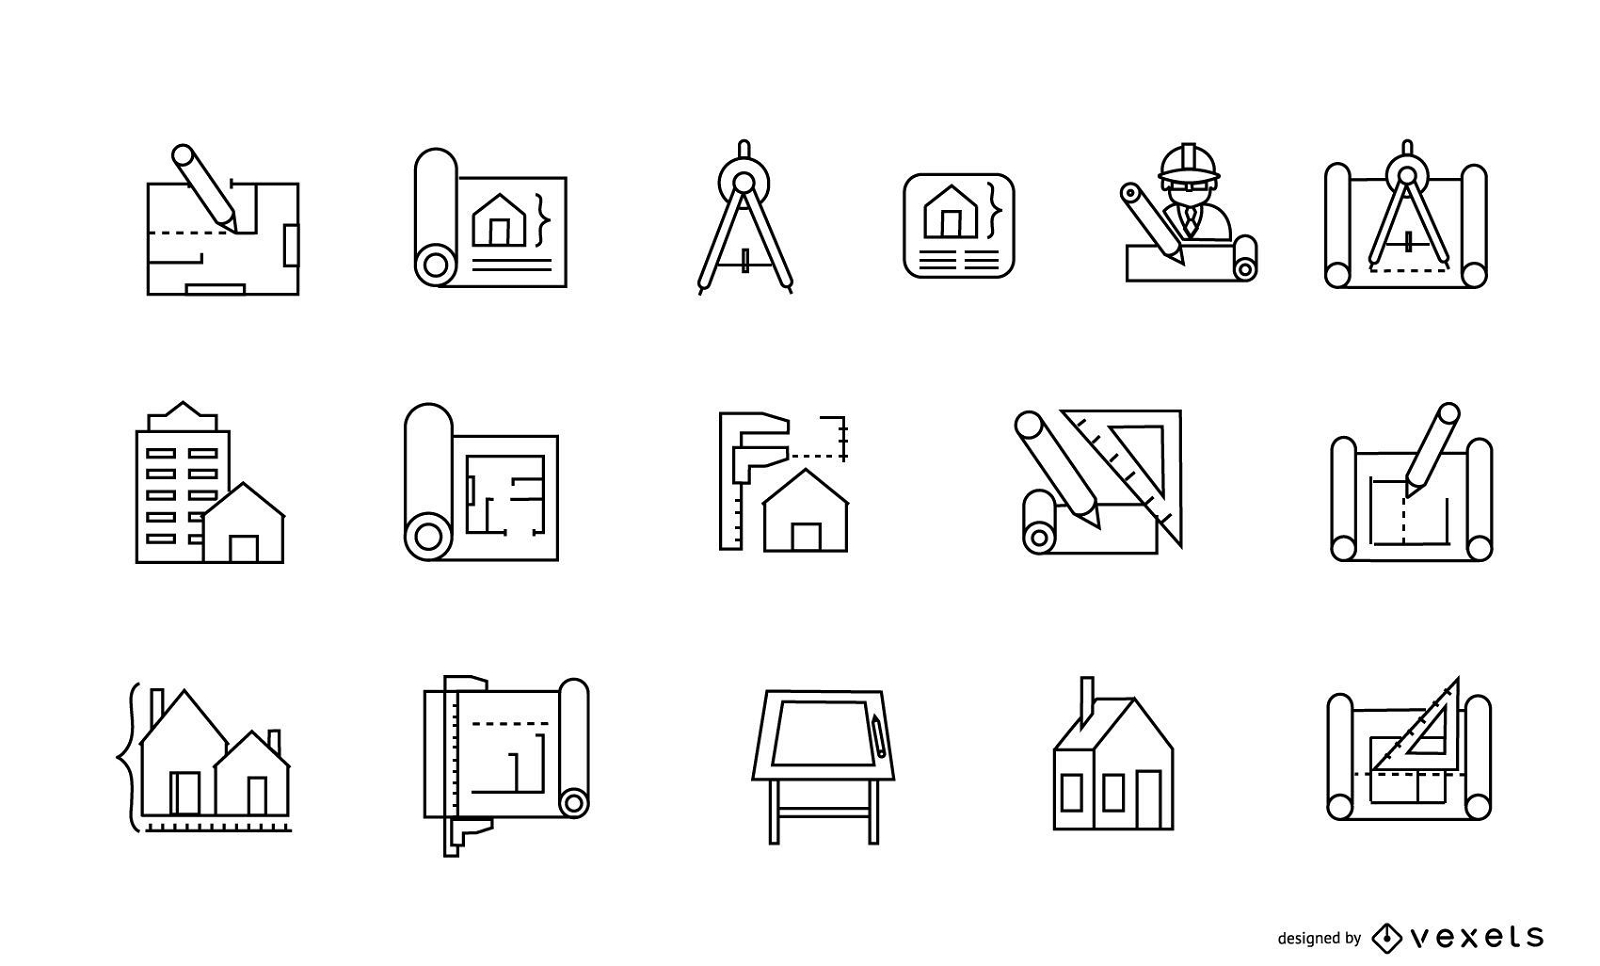 program icons for architectural diagrams